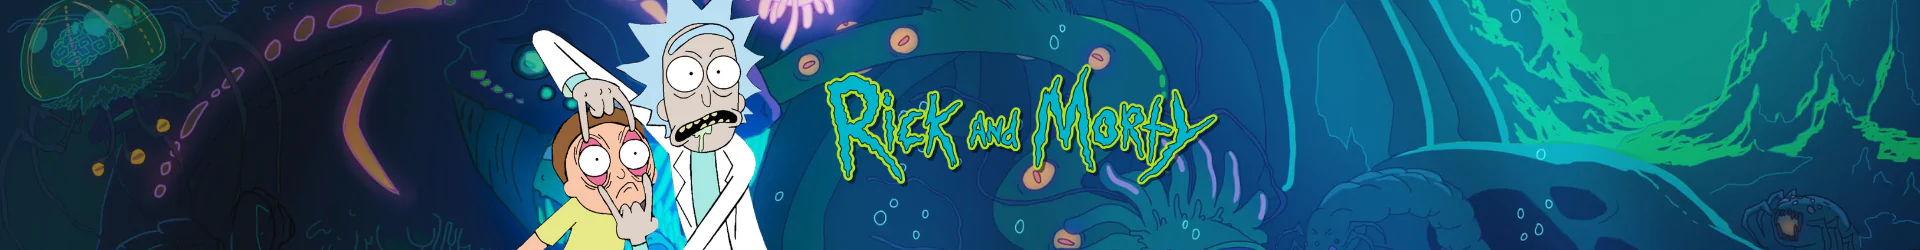 Rick and Morty puzzles banner